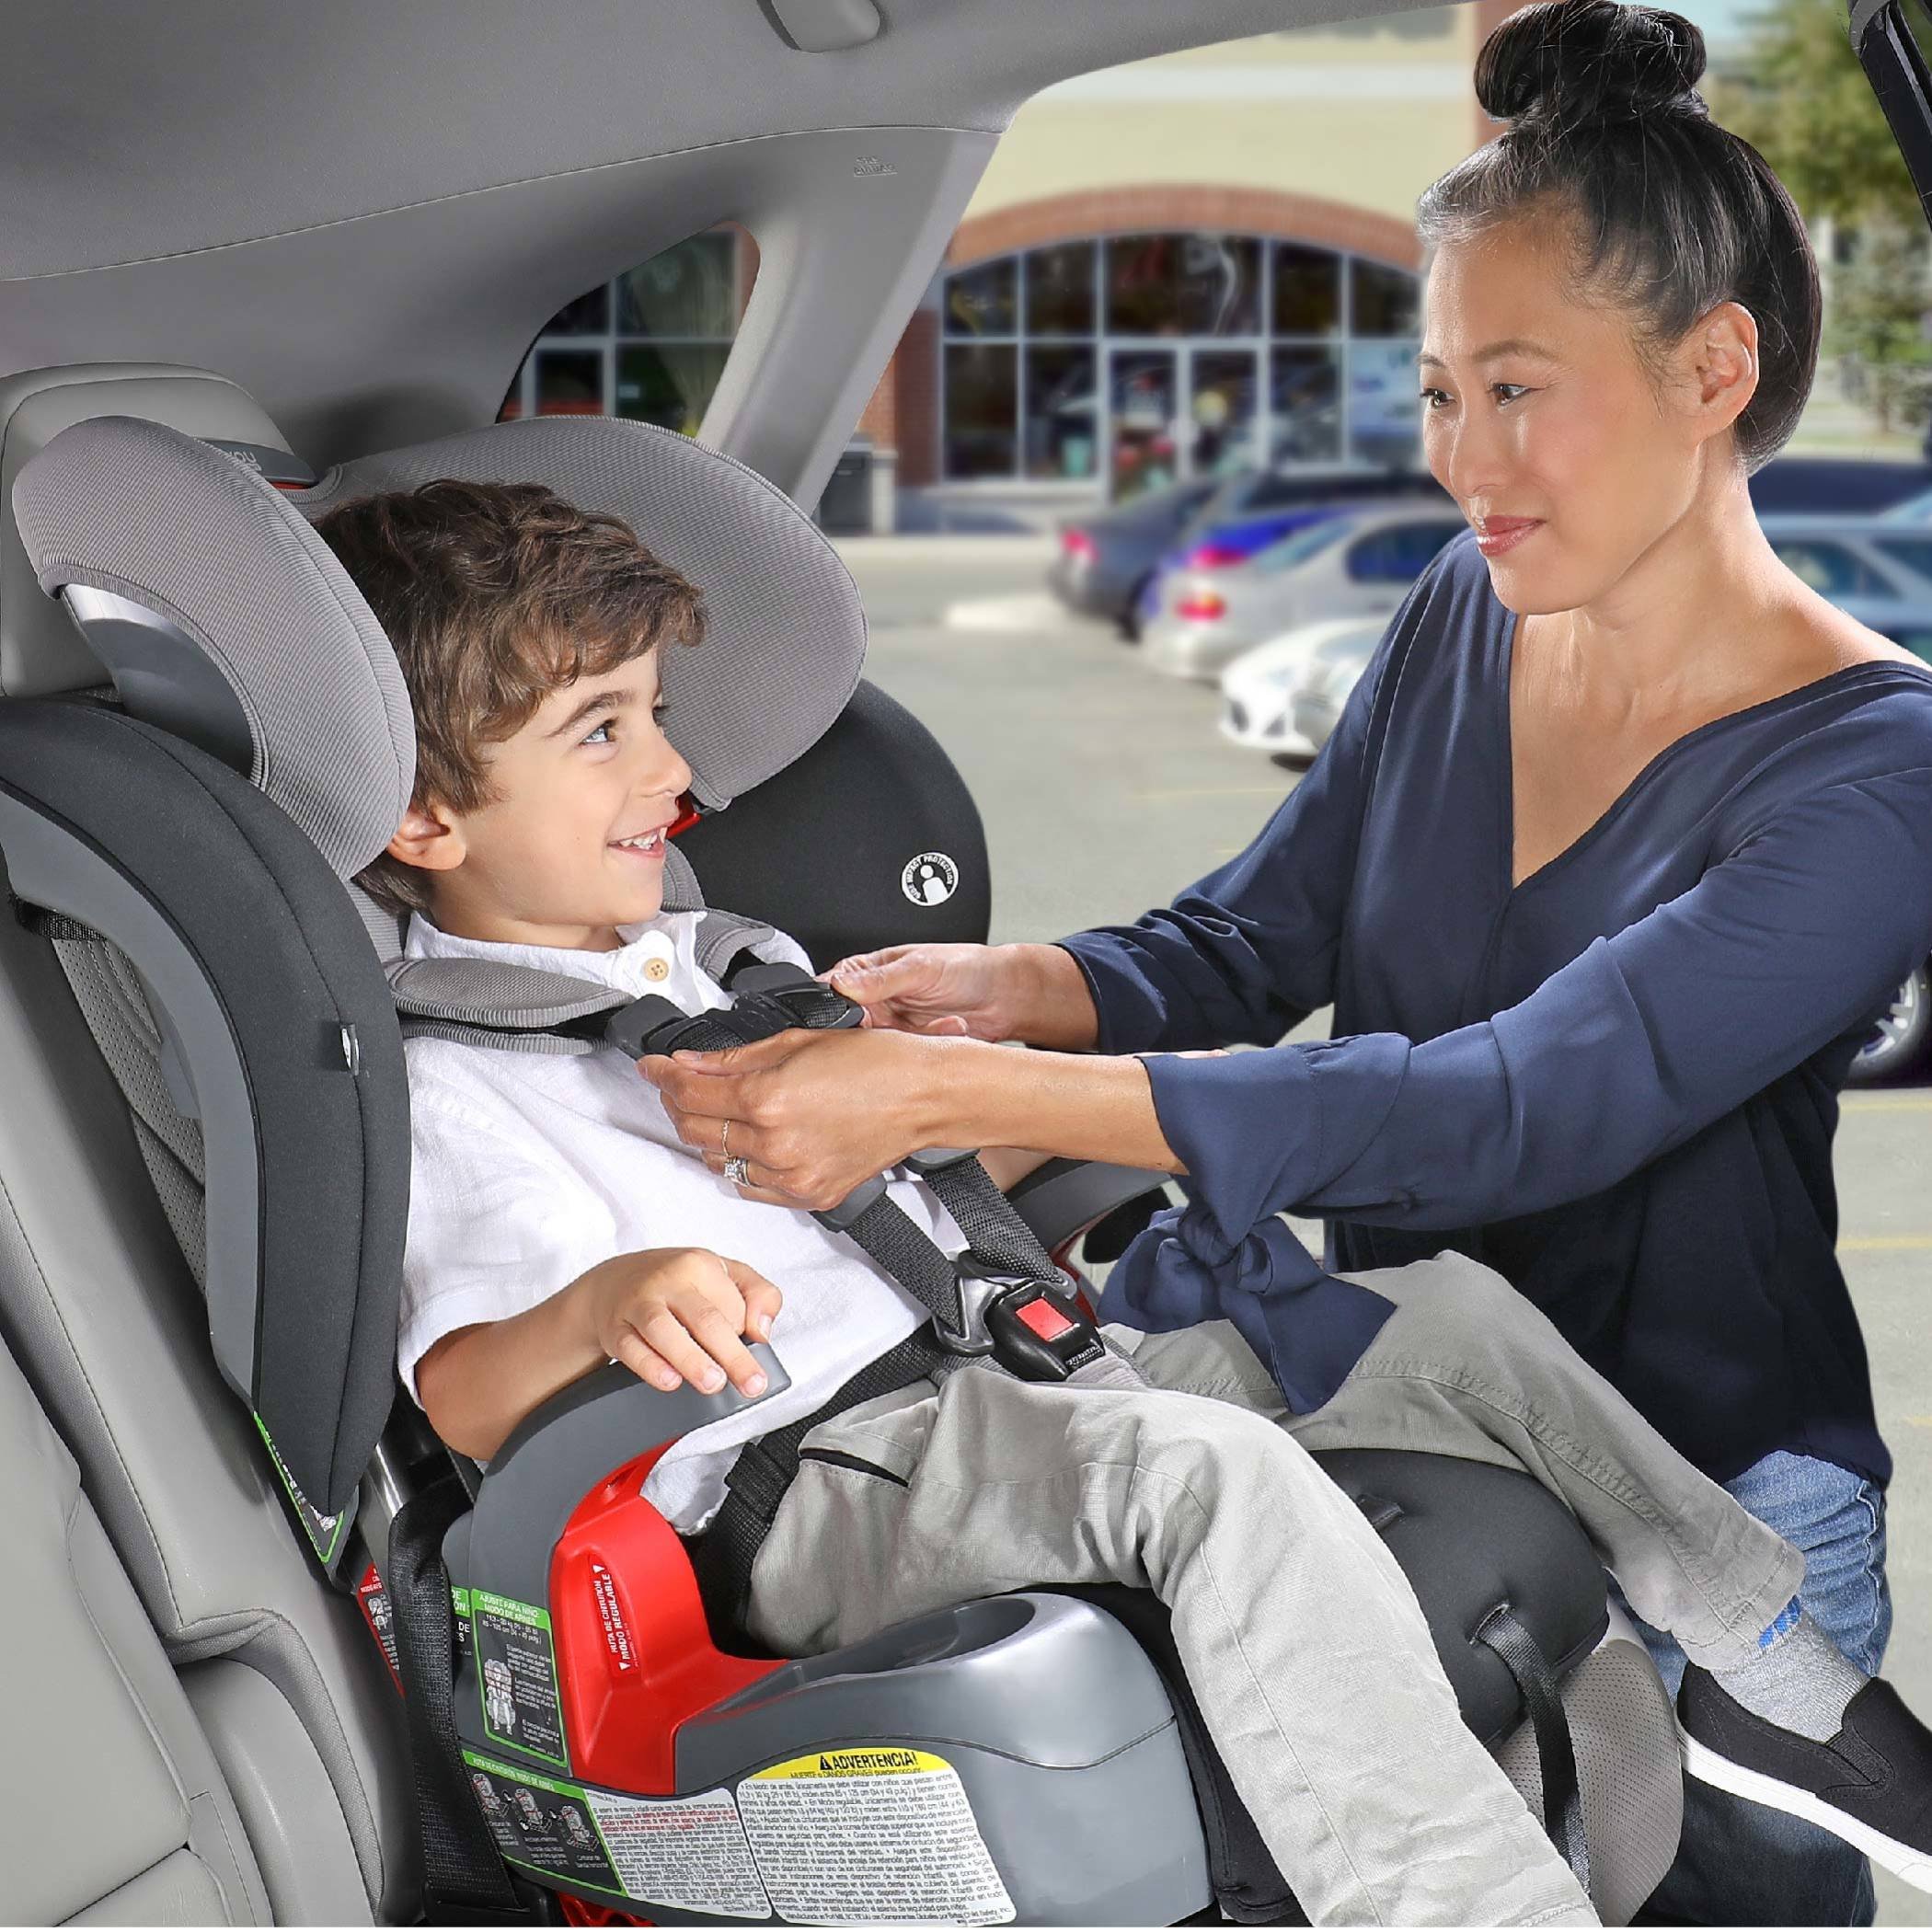 Mother adjusting the Harness on her childs harness-2-booster car seat (Copy)